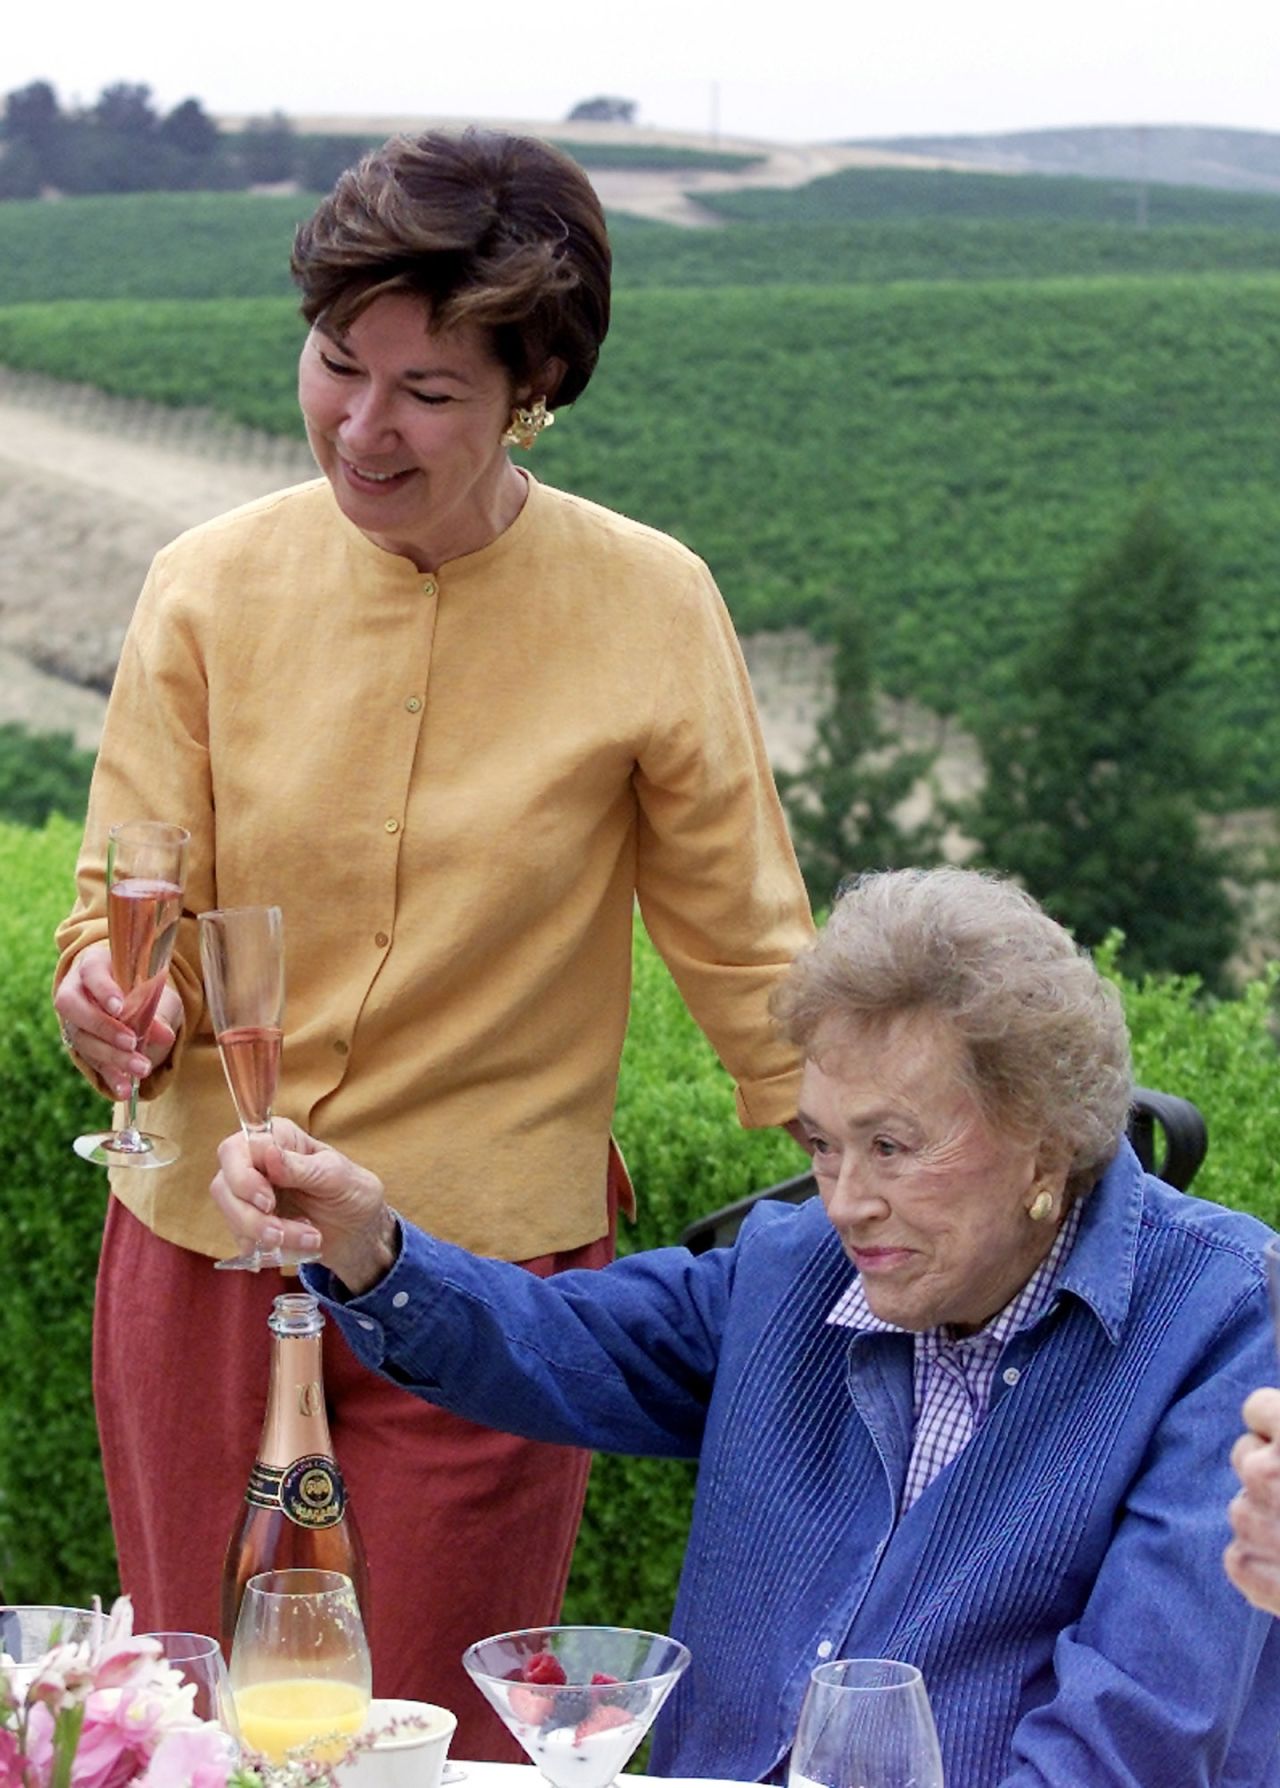 Child and winemaker Eileen Crane share a toast during a brunch to celebrate Child's 90th birthday in Napa, California, in 2002.